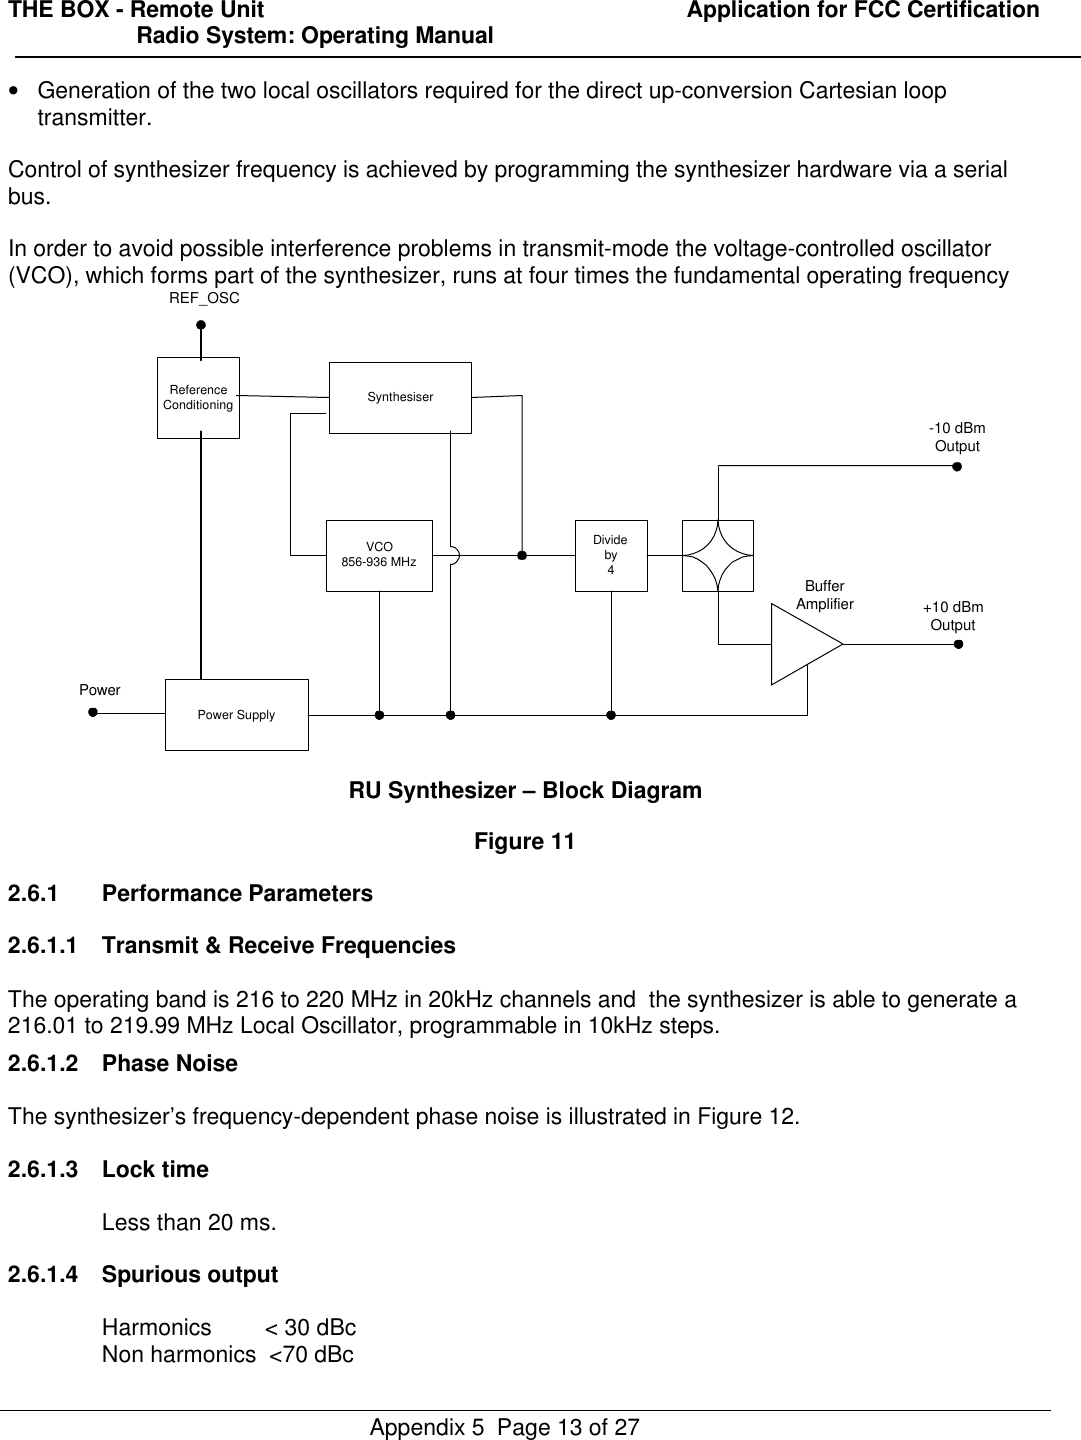 THE BOX - Remote Unit                                                                  Application for FCC Certification                    Radio System: Operating ManualAppendix 5  Page 13 of 27• Generation of the two local oscillators required for the direct up-conversion Cartesian looptransmitter.Control of synthesizer frequency is achieved by programming the synthesizer hardware via a serialbus.In order to avoid possible interference problems in transmit-mode the voltage-controlled oscillator(VCO), which forms part of the synthesizer, runs at four times the fundamental operating frequencyReferenceConditioning SynthesiserVCO856-936 MHzPower SupplyDivideby4BufferAmplifierPower-10 dBmOutput+10 dBmOutputREF_OSCRU Synthesizer – Block DiagramFigure 112.6.1 Performance Parameters2.6.1.1 Transmit &amp; Receive FrequenciesThe operating band is 216 to 220 MHz in 20kHz channels and  the synthesizer is able to generate a216.01 to 219.99 MHz Local Oscillator, programmable in 10kHz steps.2.6.1.2 Phase NoiseThe synthesizer’s frequency-dependent phase noise is illustrated in Figure 12.2.6.1.3 Lock timeLess than 20 ms.2.6.1.4 Spurious outputHarmonics      &lt; 30 dBcNon harmonics  &lt;70 dBc